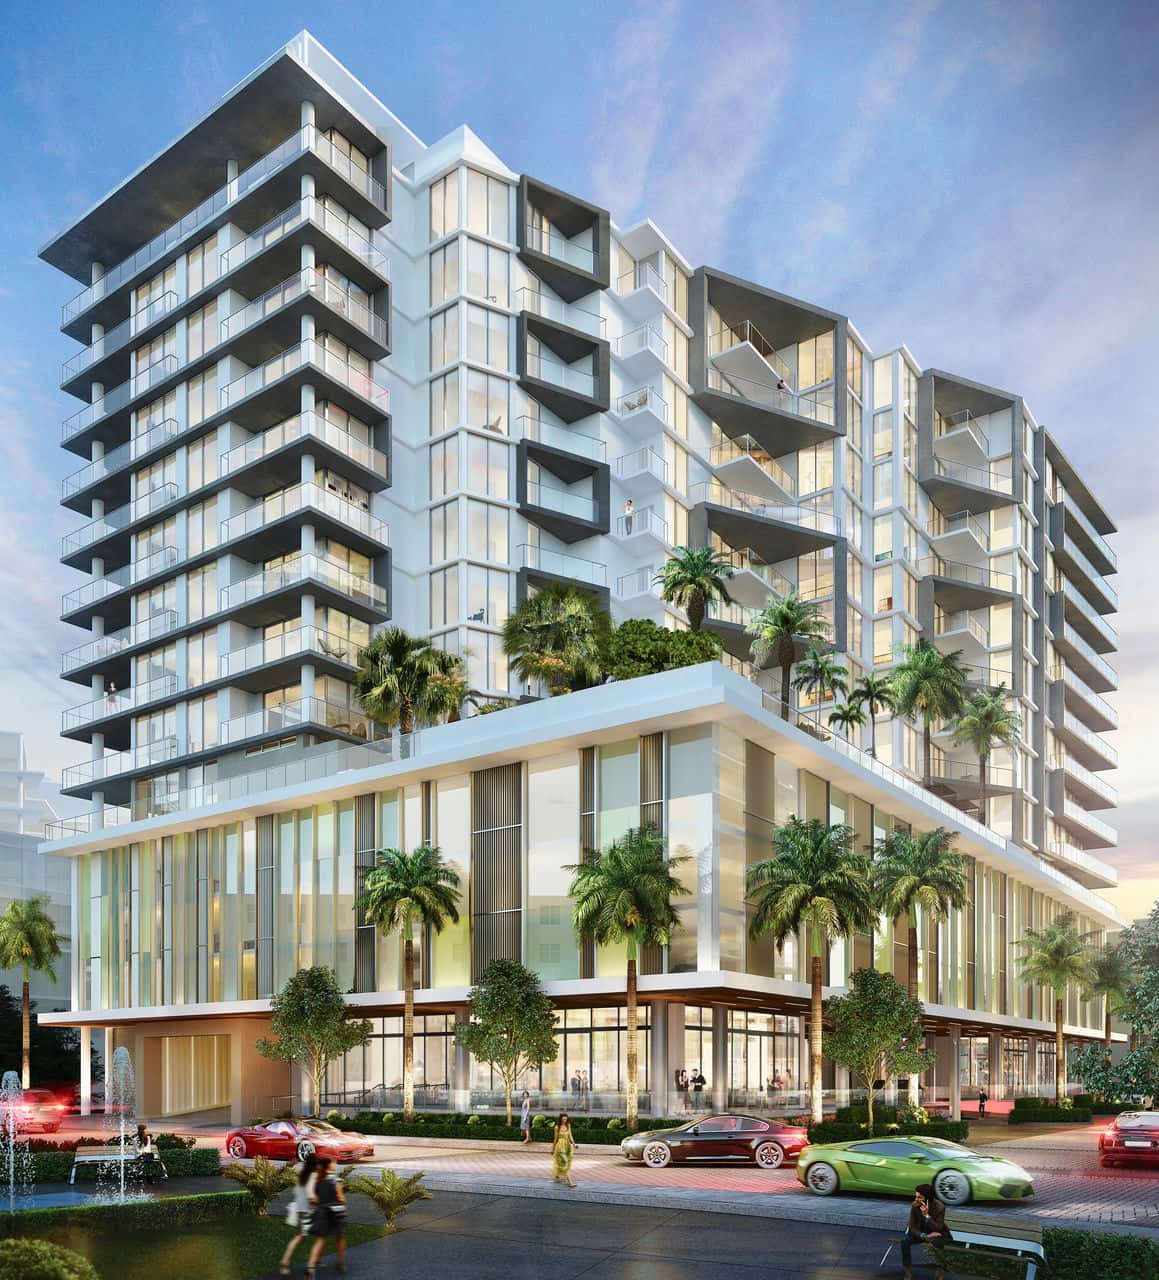 Metropolitan Naples will feature incredible residences, plus rooftop amenities including an infinity pool, fitness center with yoga studio and an outdoor lounge.